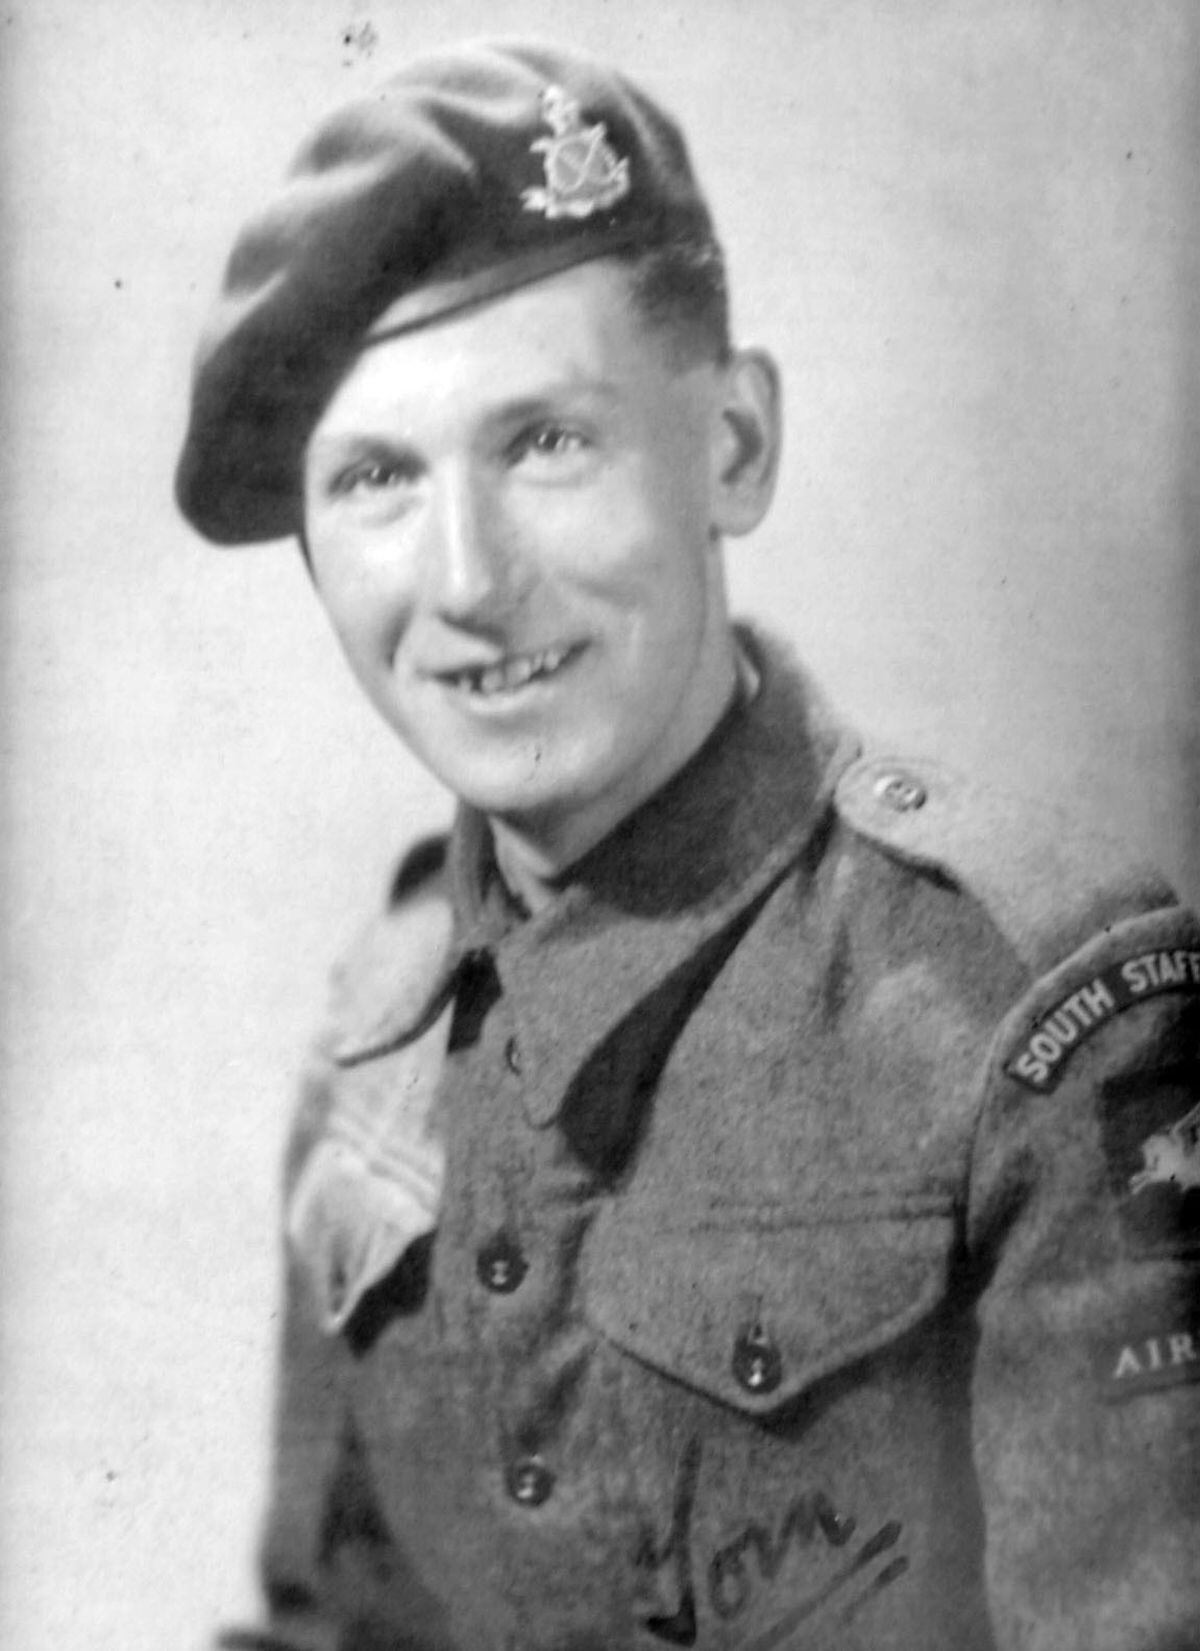 Tom Brewin with the South Staffordshire 2nd Battalion in 1943.